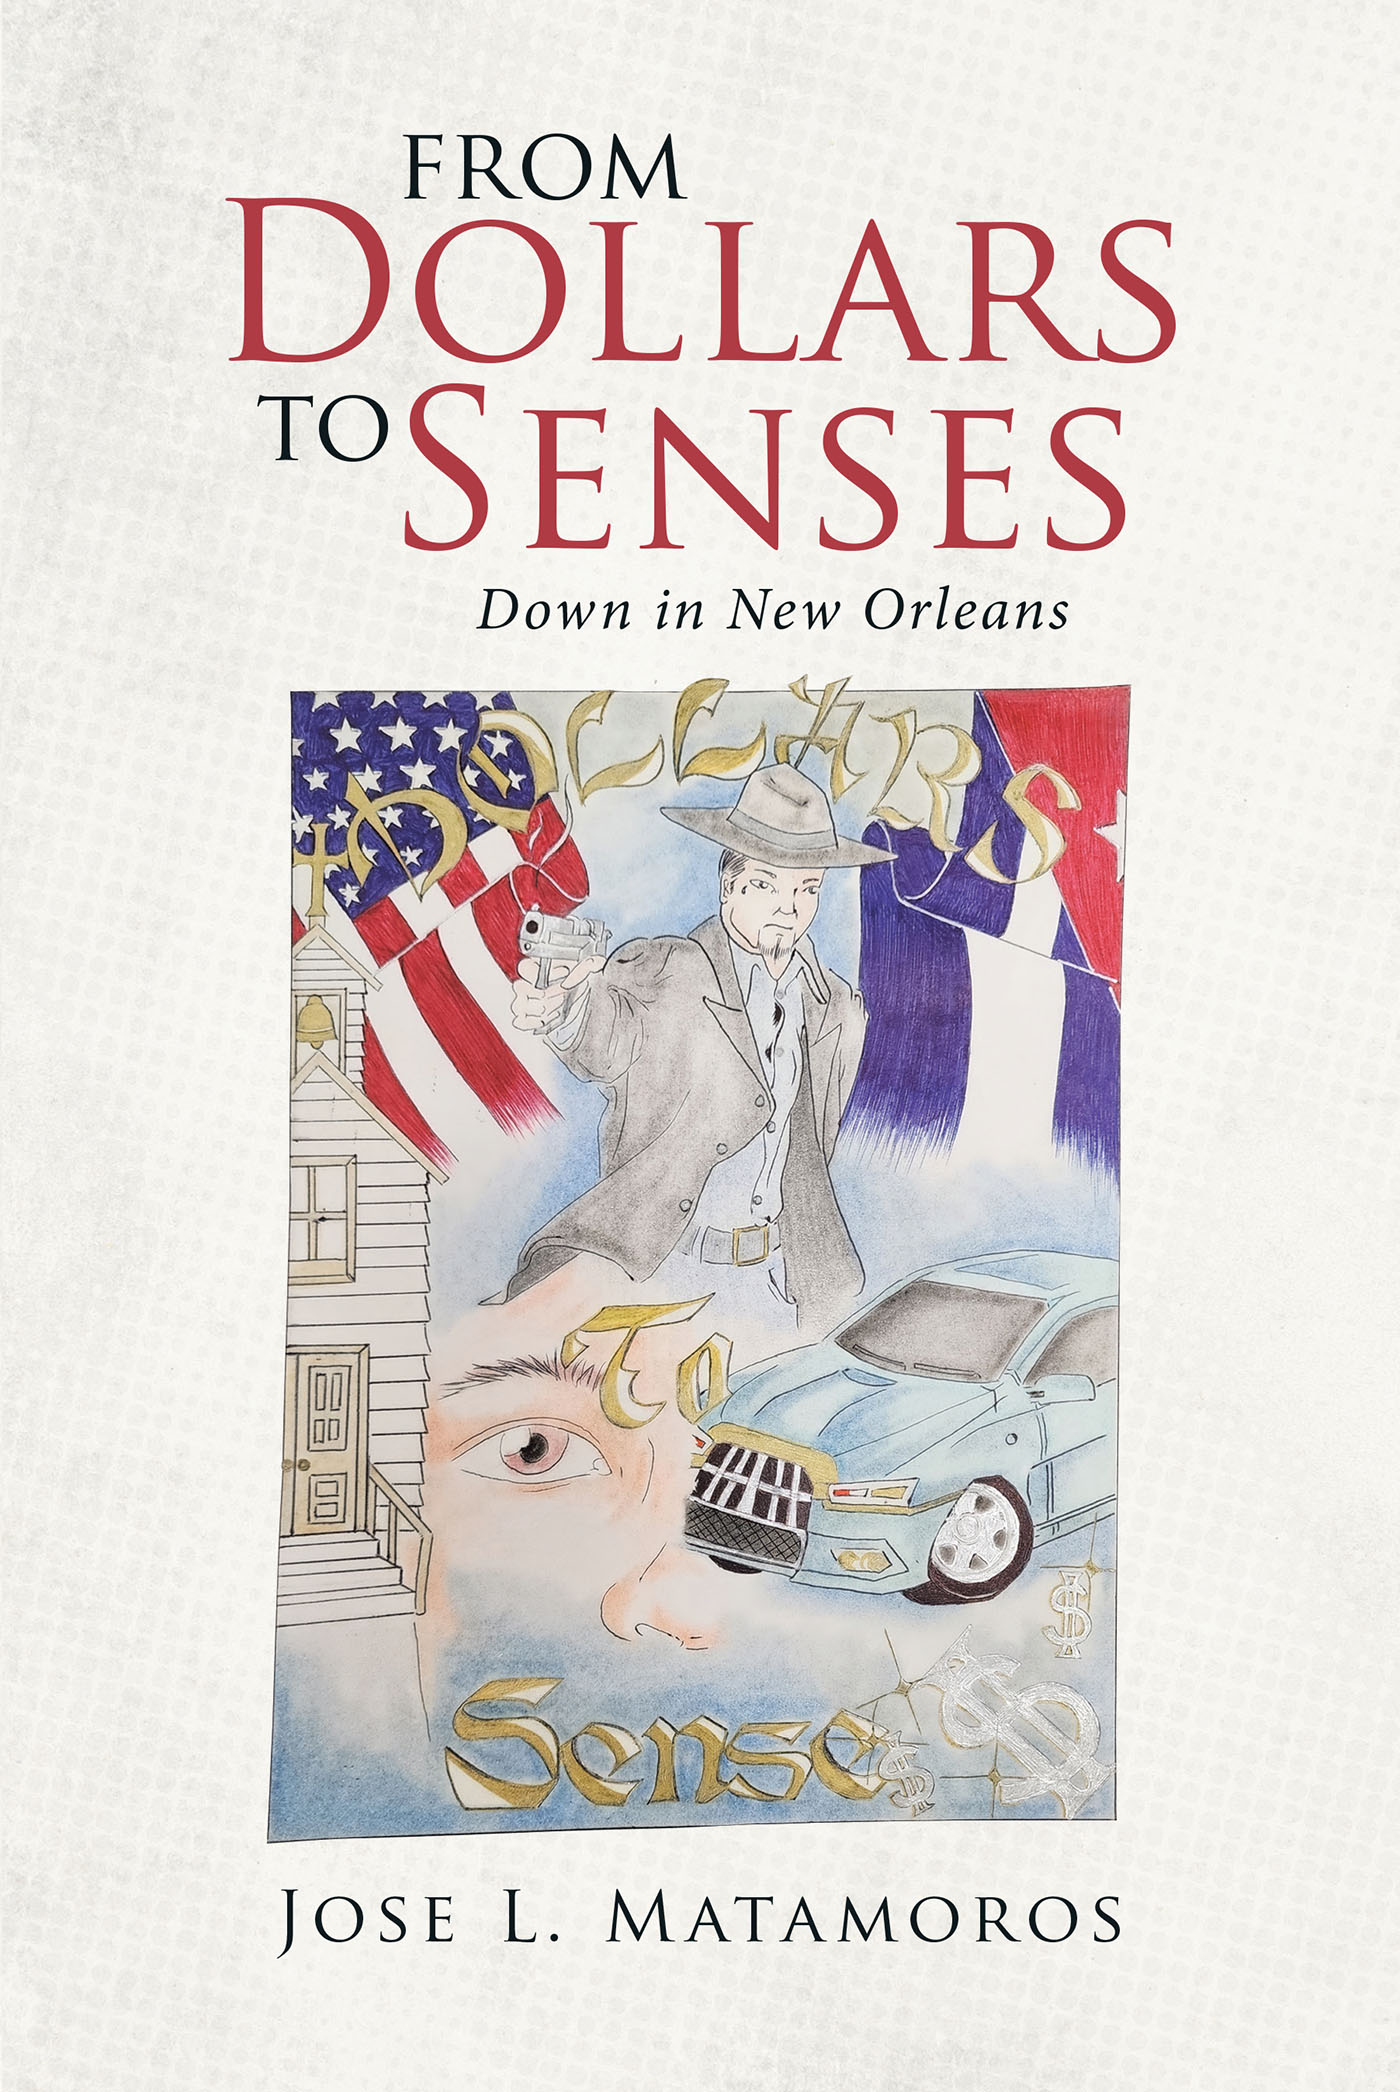 Author Jose L. Matamoros’s New Book, "From Dollars to Senses Down in New Orleans," Explores How One Man's Life of Crime is Slowly Turned to a Life Dedicated to Christ